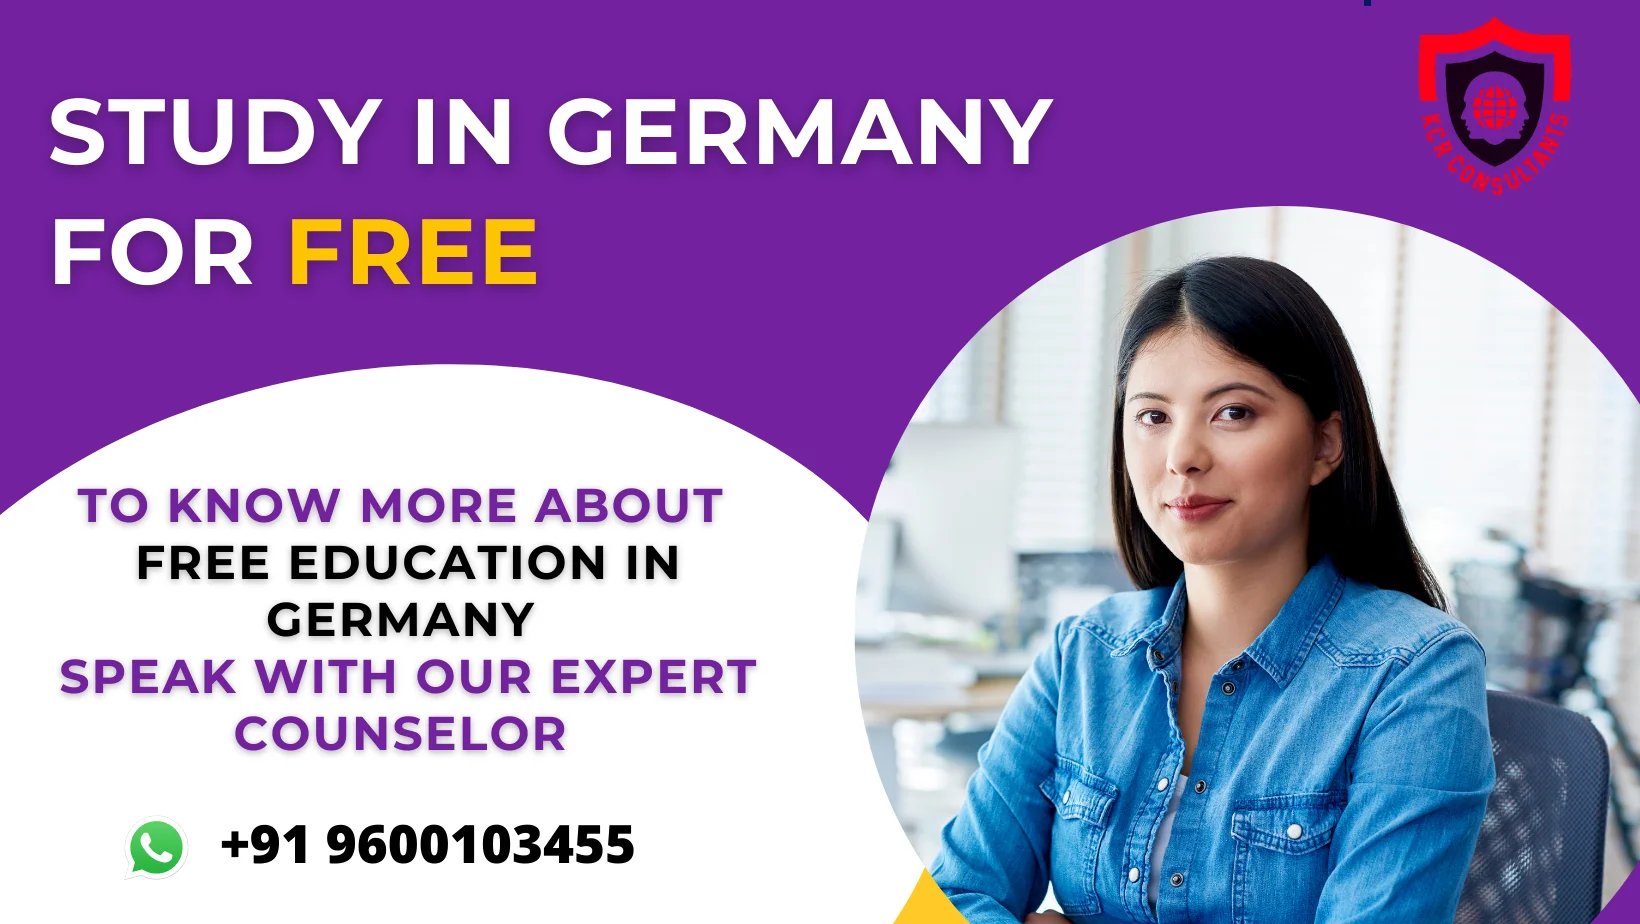 KCR CONSULTANTS FREE EDUCATION IN GERMANY